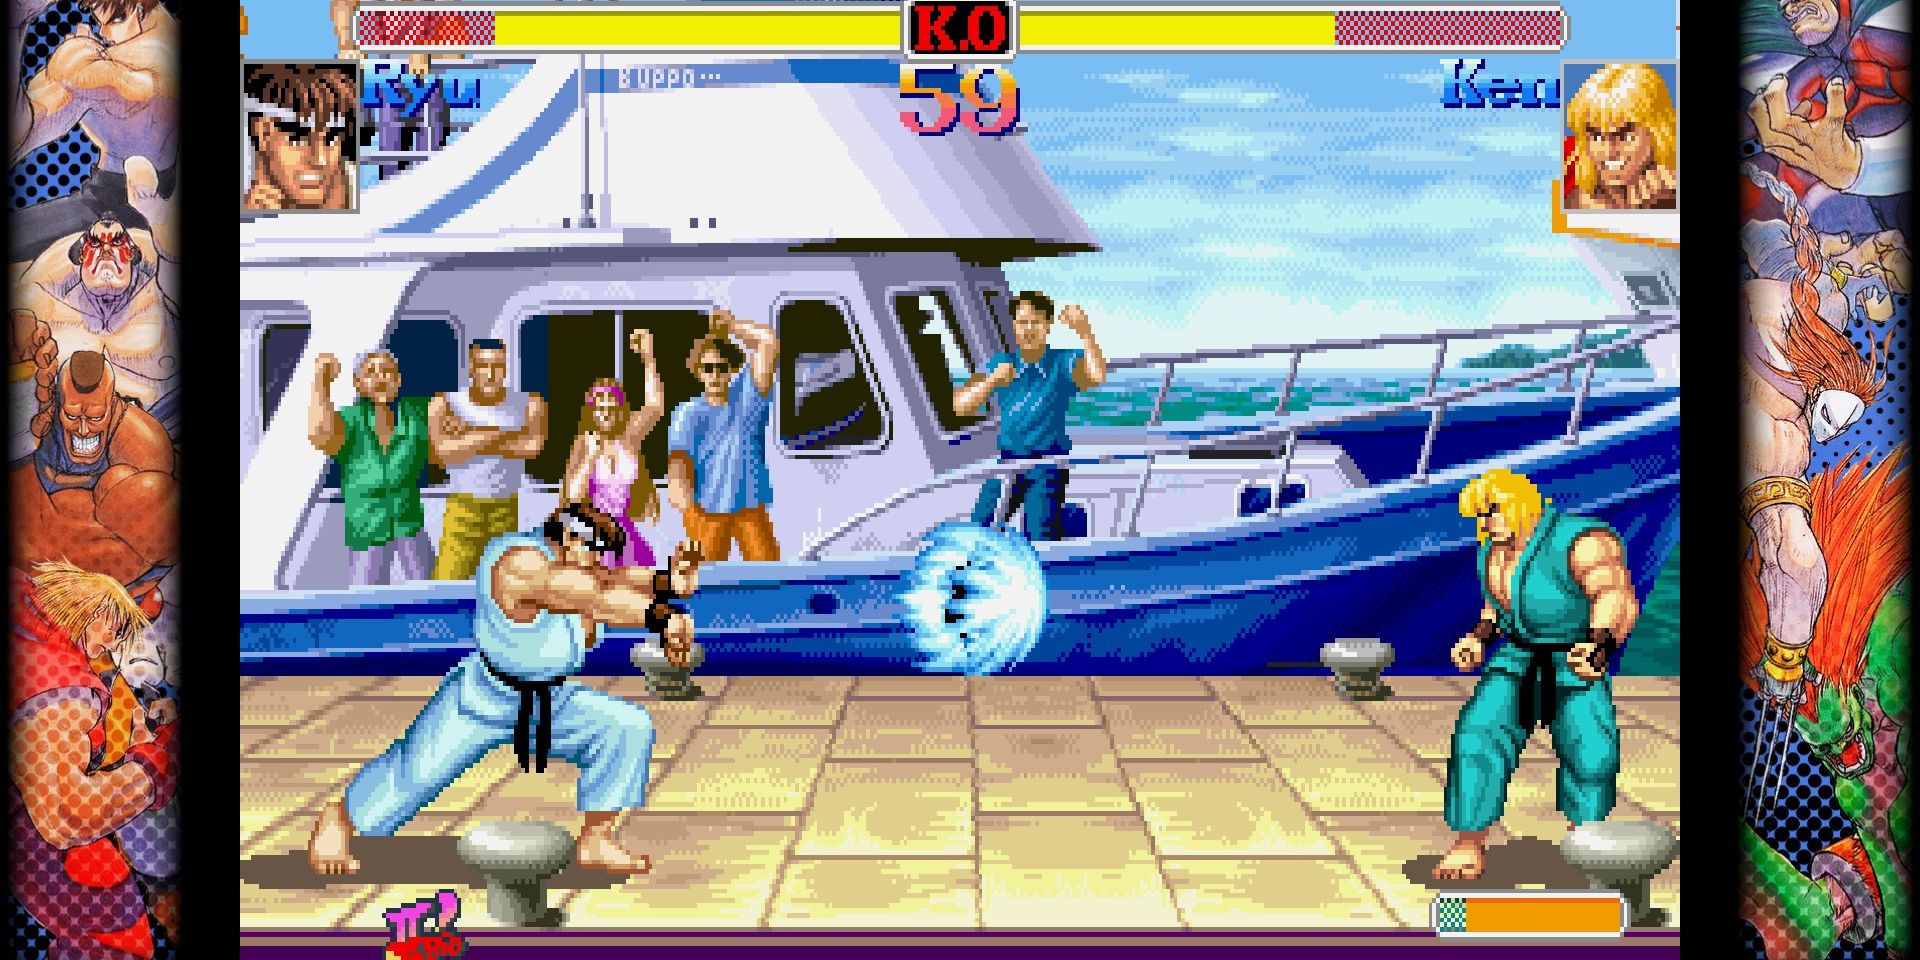 Ryu uses his Kadouken against Ken in Hyper Street Fighter II: The Anniversary Edition